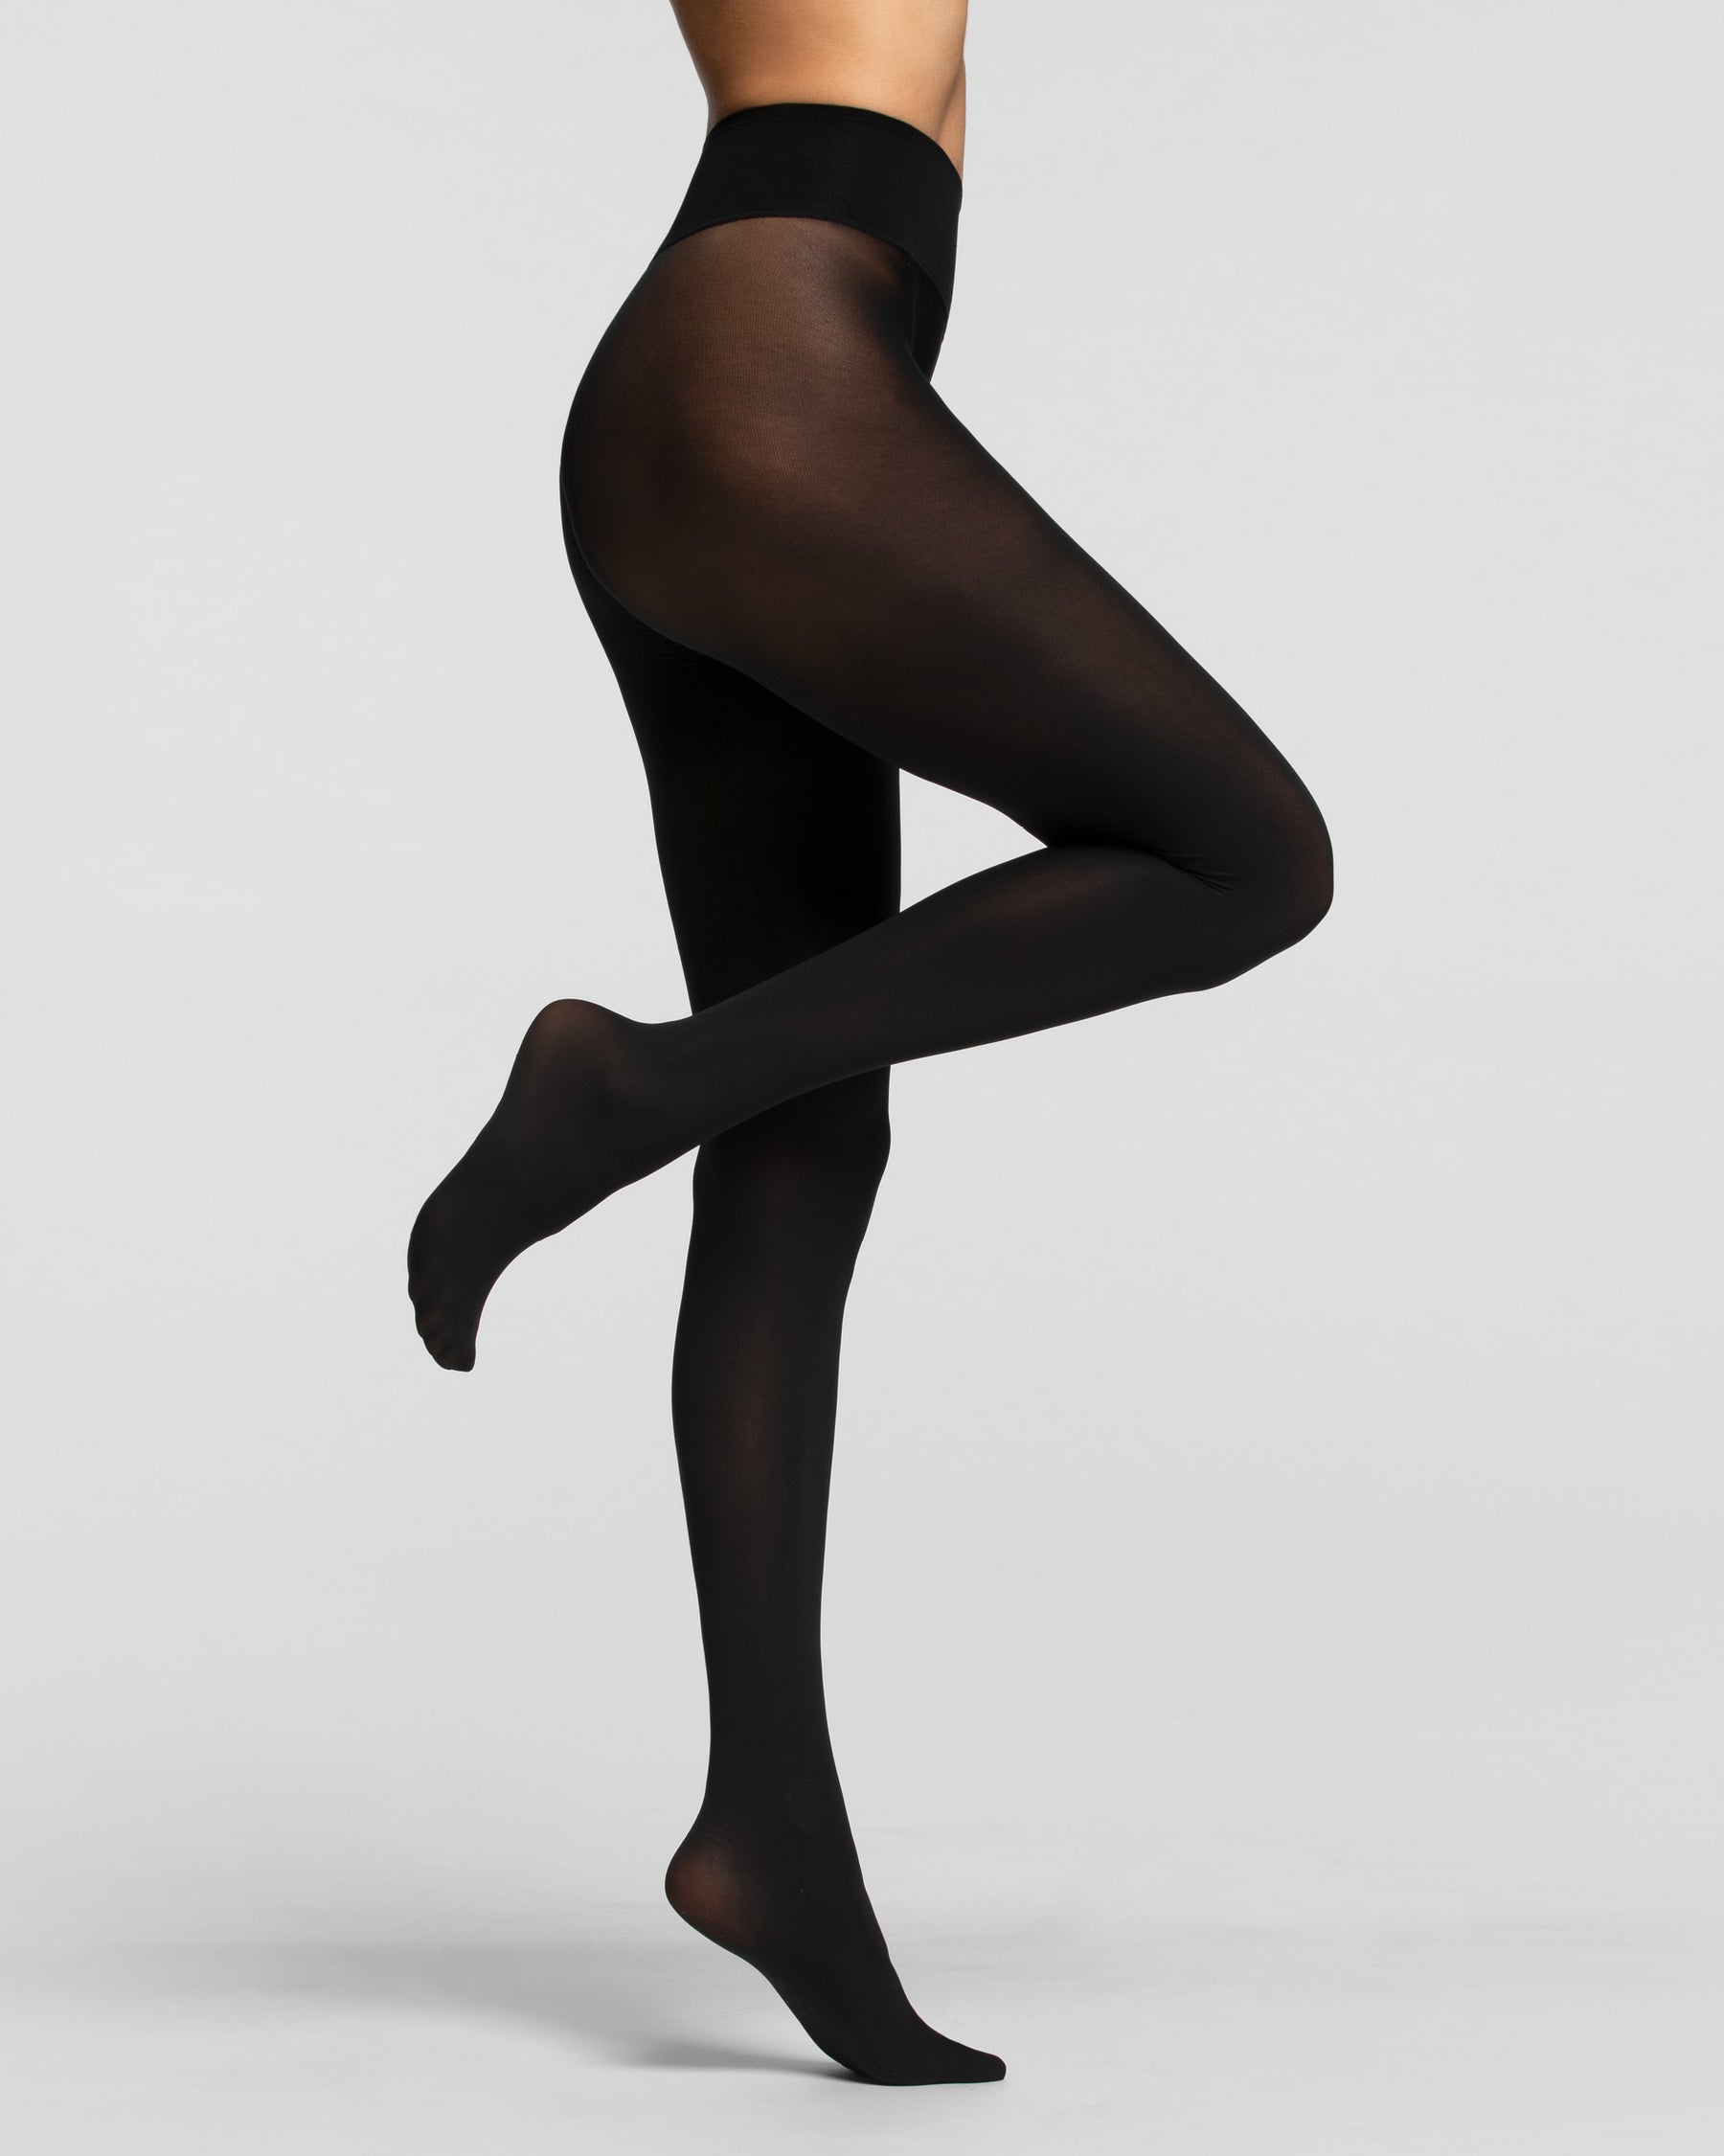 2017 New/200Den] Let's Slim Women's Shaping TIGHTS - Opaque Black